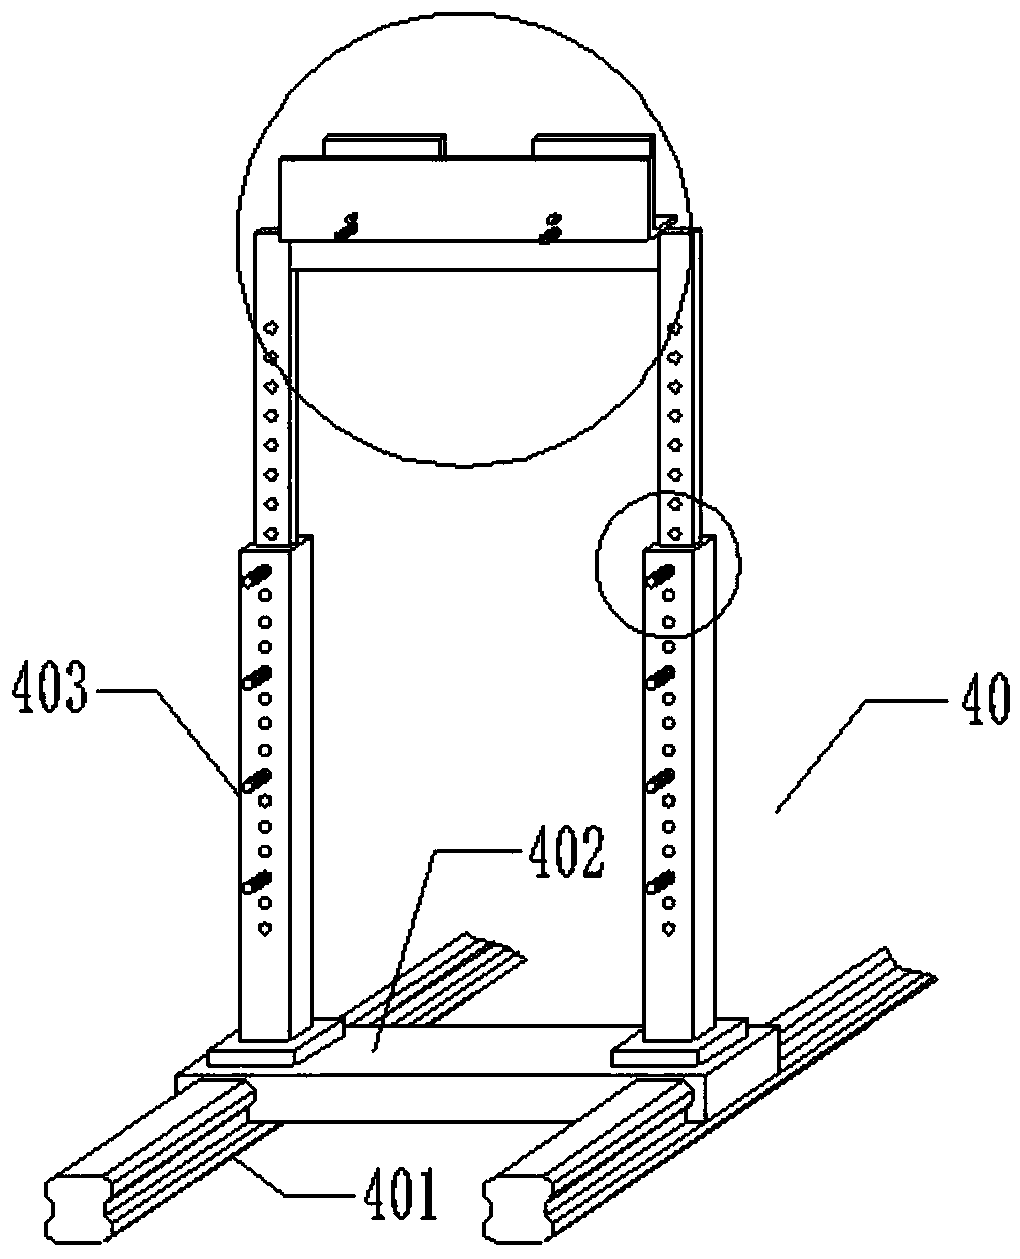 Second lining integrated complete set tool construction equipment and application method